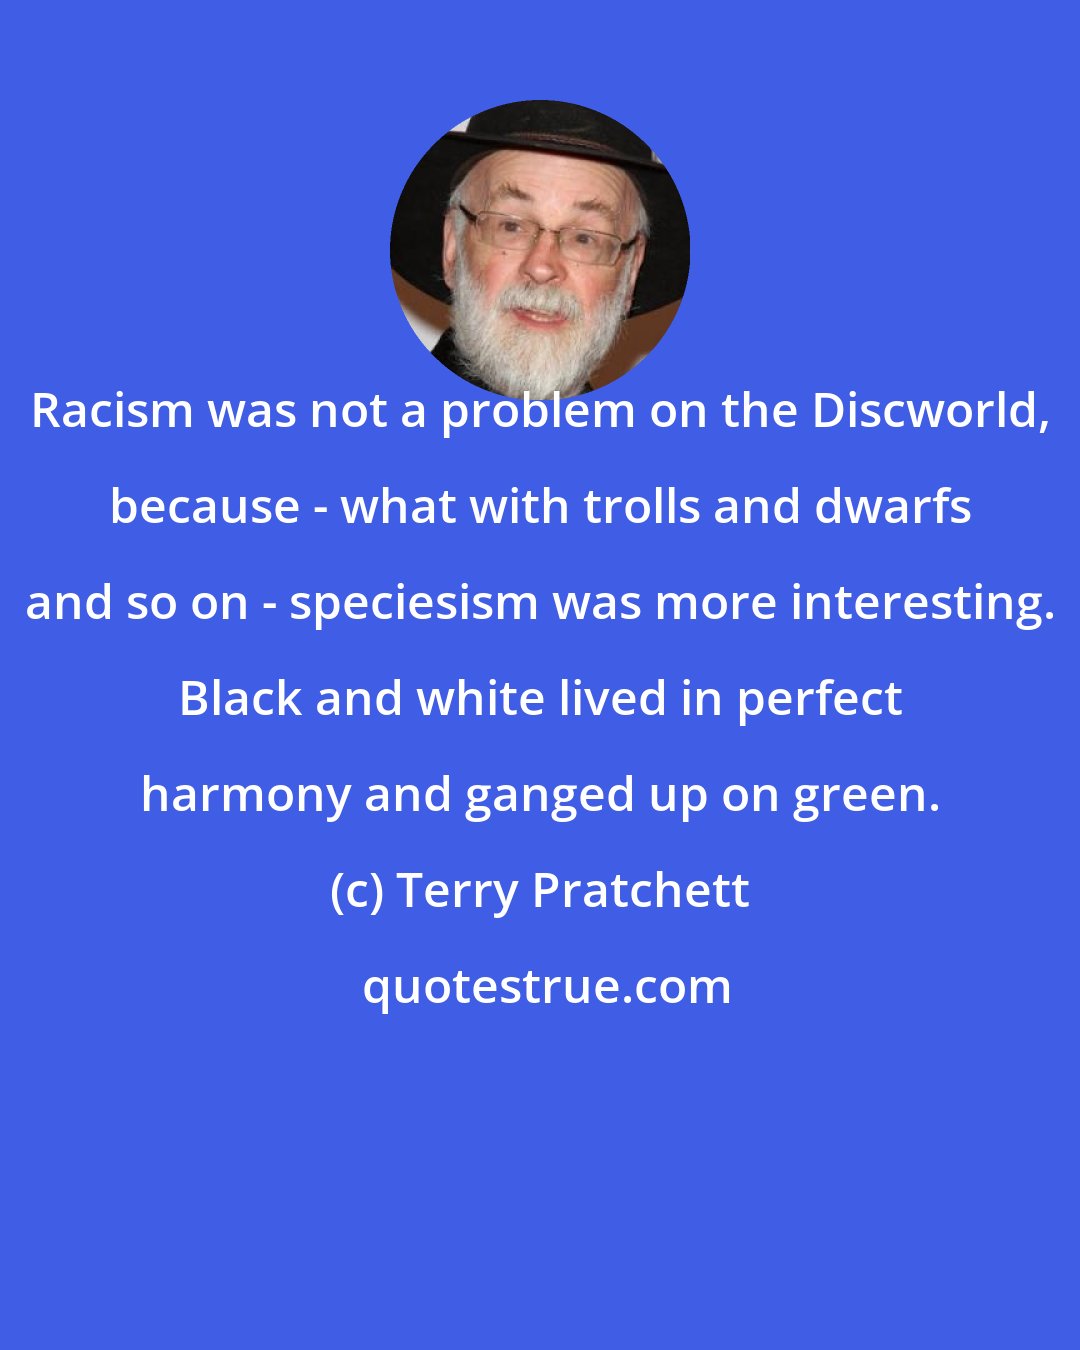 Terry Pratchett: Racism was not a problem on the Discworld, because - what with trolls and dwarfs and so on - speciesism was more interesting. Black and white lived in perfect harmony and ganged up on green.